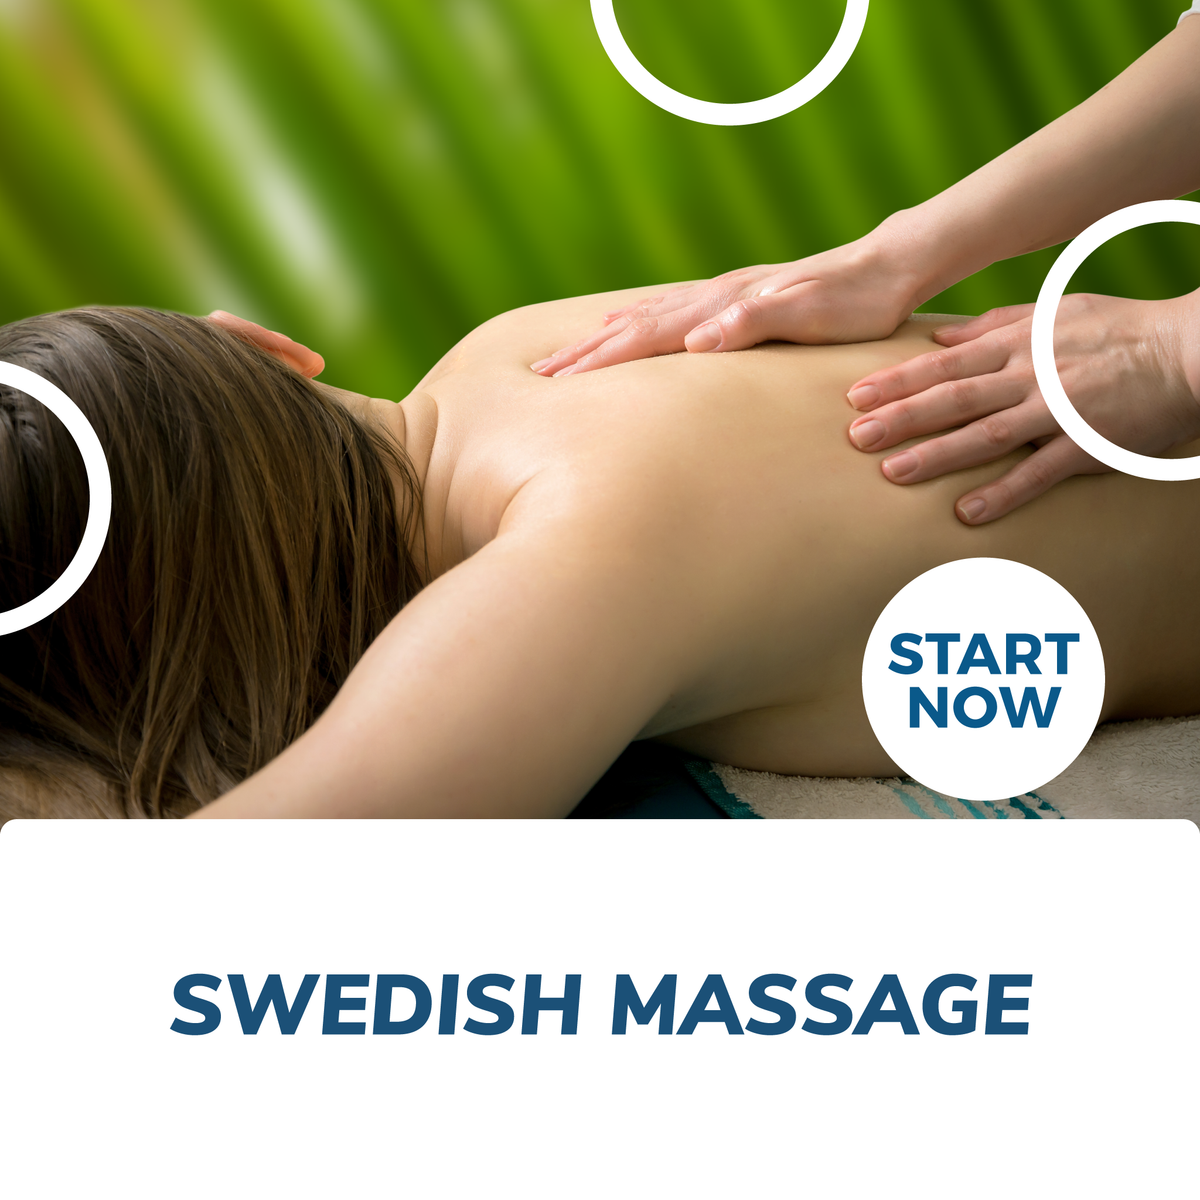 Swedish Massage: Benefits, Technique, What to Expect